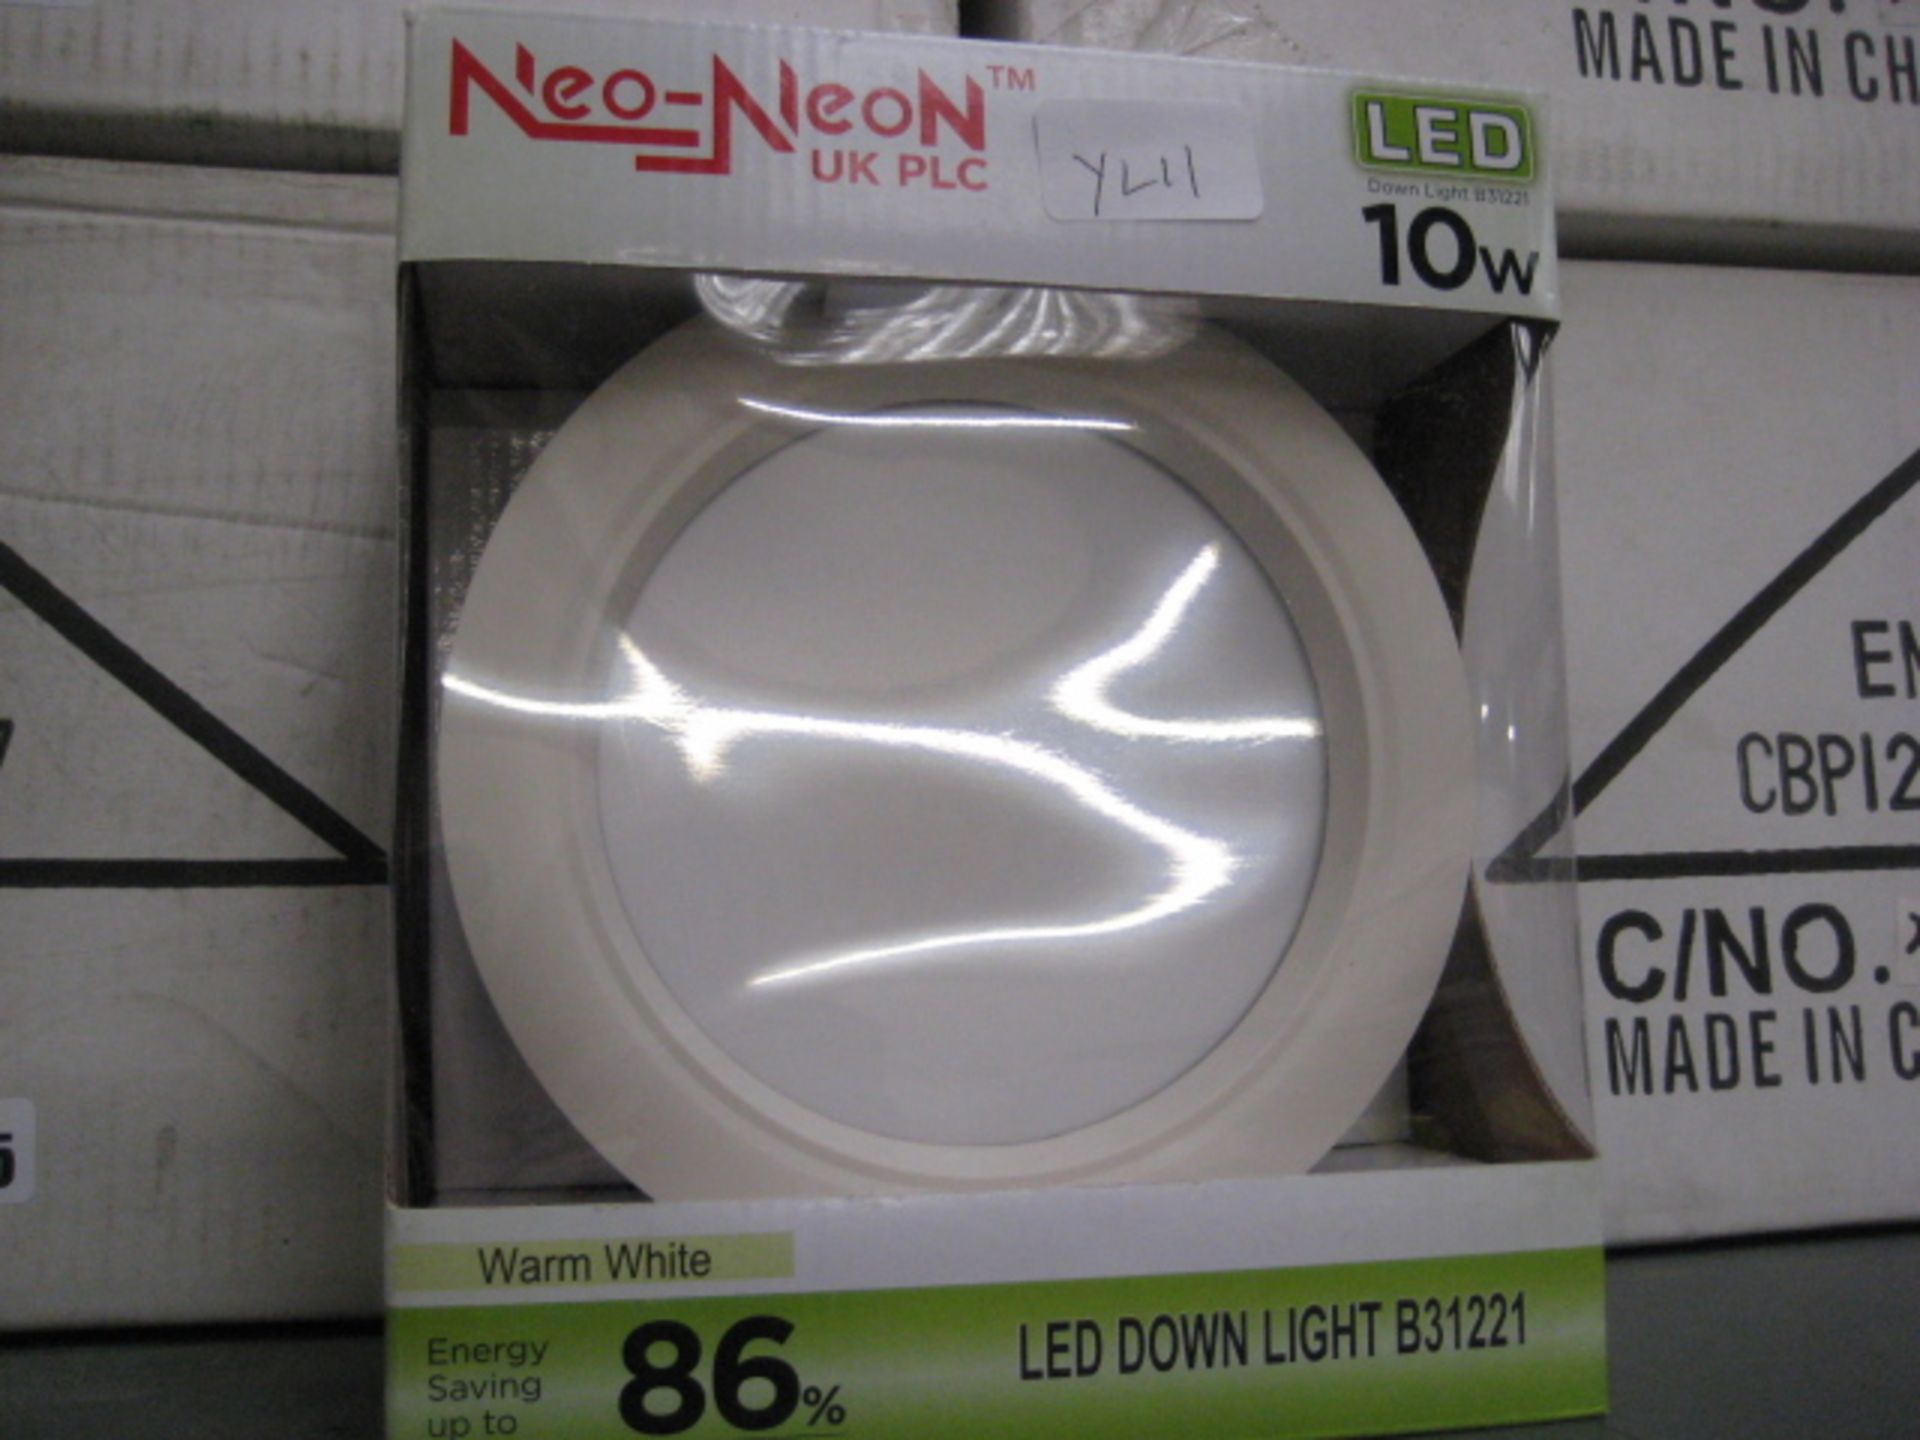 Box containing 8 Neo Neon LED 10w down lights